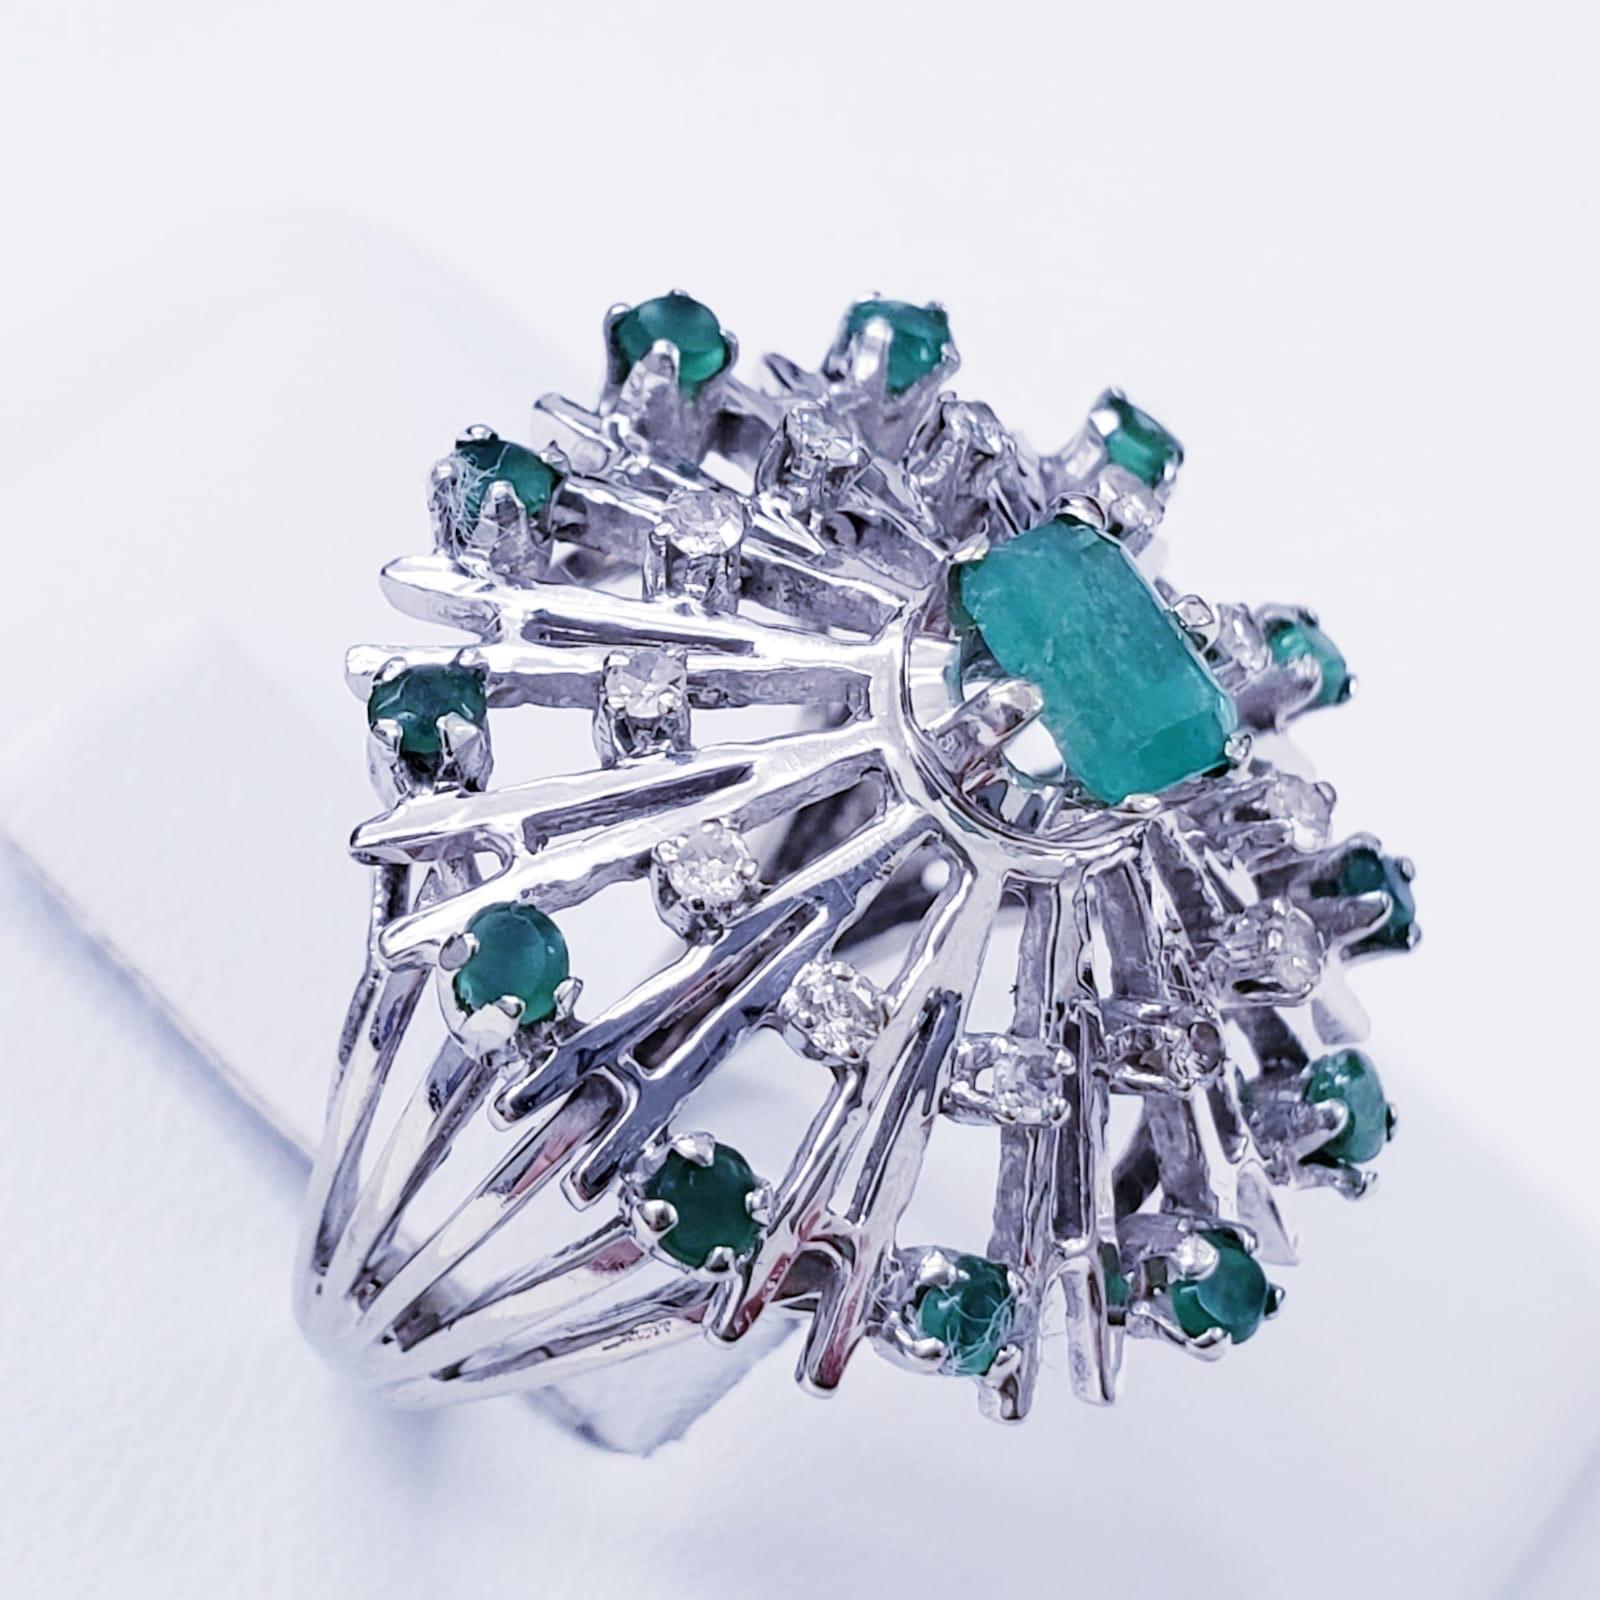 Vintage 1.00 Carat Total Weight Emeralds and Diamonds Cluster Cocktail Ring. The ring is made of 18 karat and features approx total emerald carat weight 0.70ct & approx 0.30ct Diamonds. The ring size is 4. The ring weights 7.8 grams. The ring